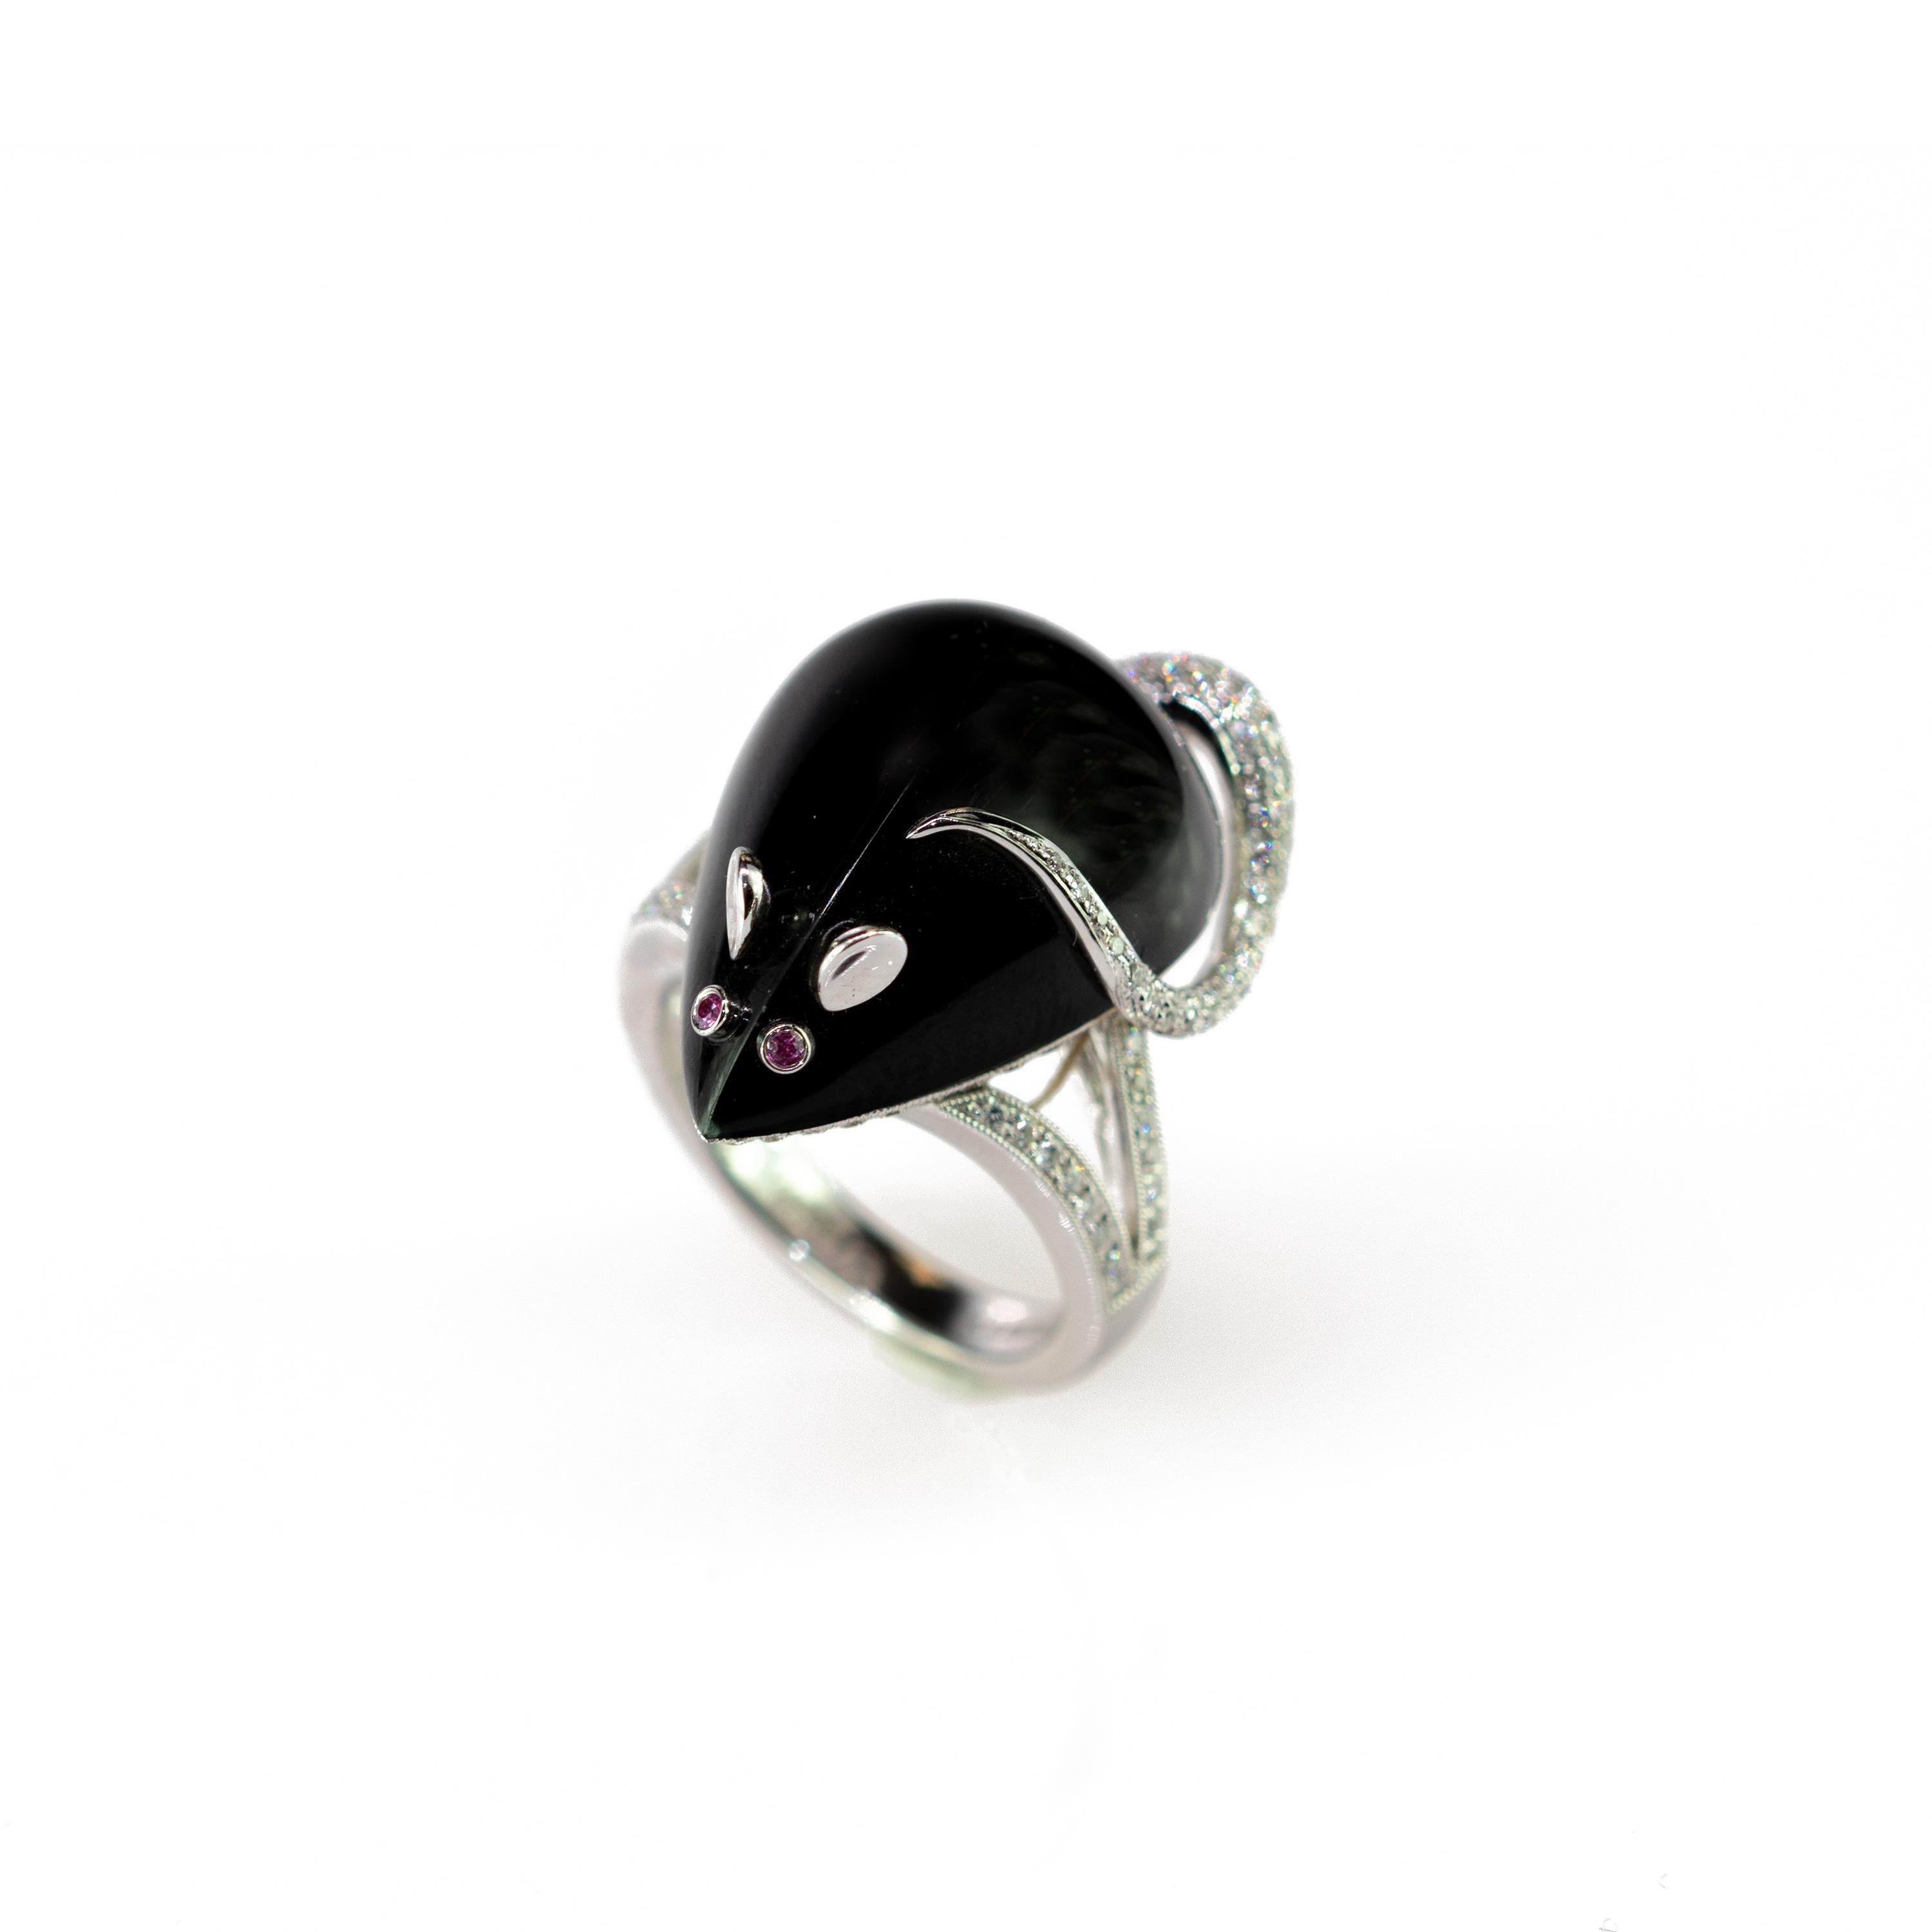 Impressive and sumptuous mouse ring depicting a black agate mouse, embellished with 1.2 karat of diamonds tale, two ruby ​​eyes and 18 k white gold ears. This authentic ring for an animal and fashion lover is setted in 18 karat white gold embedded